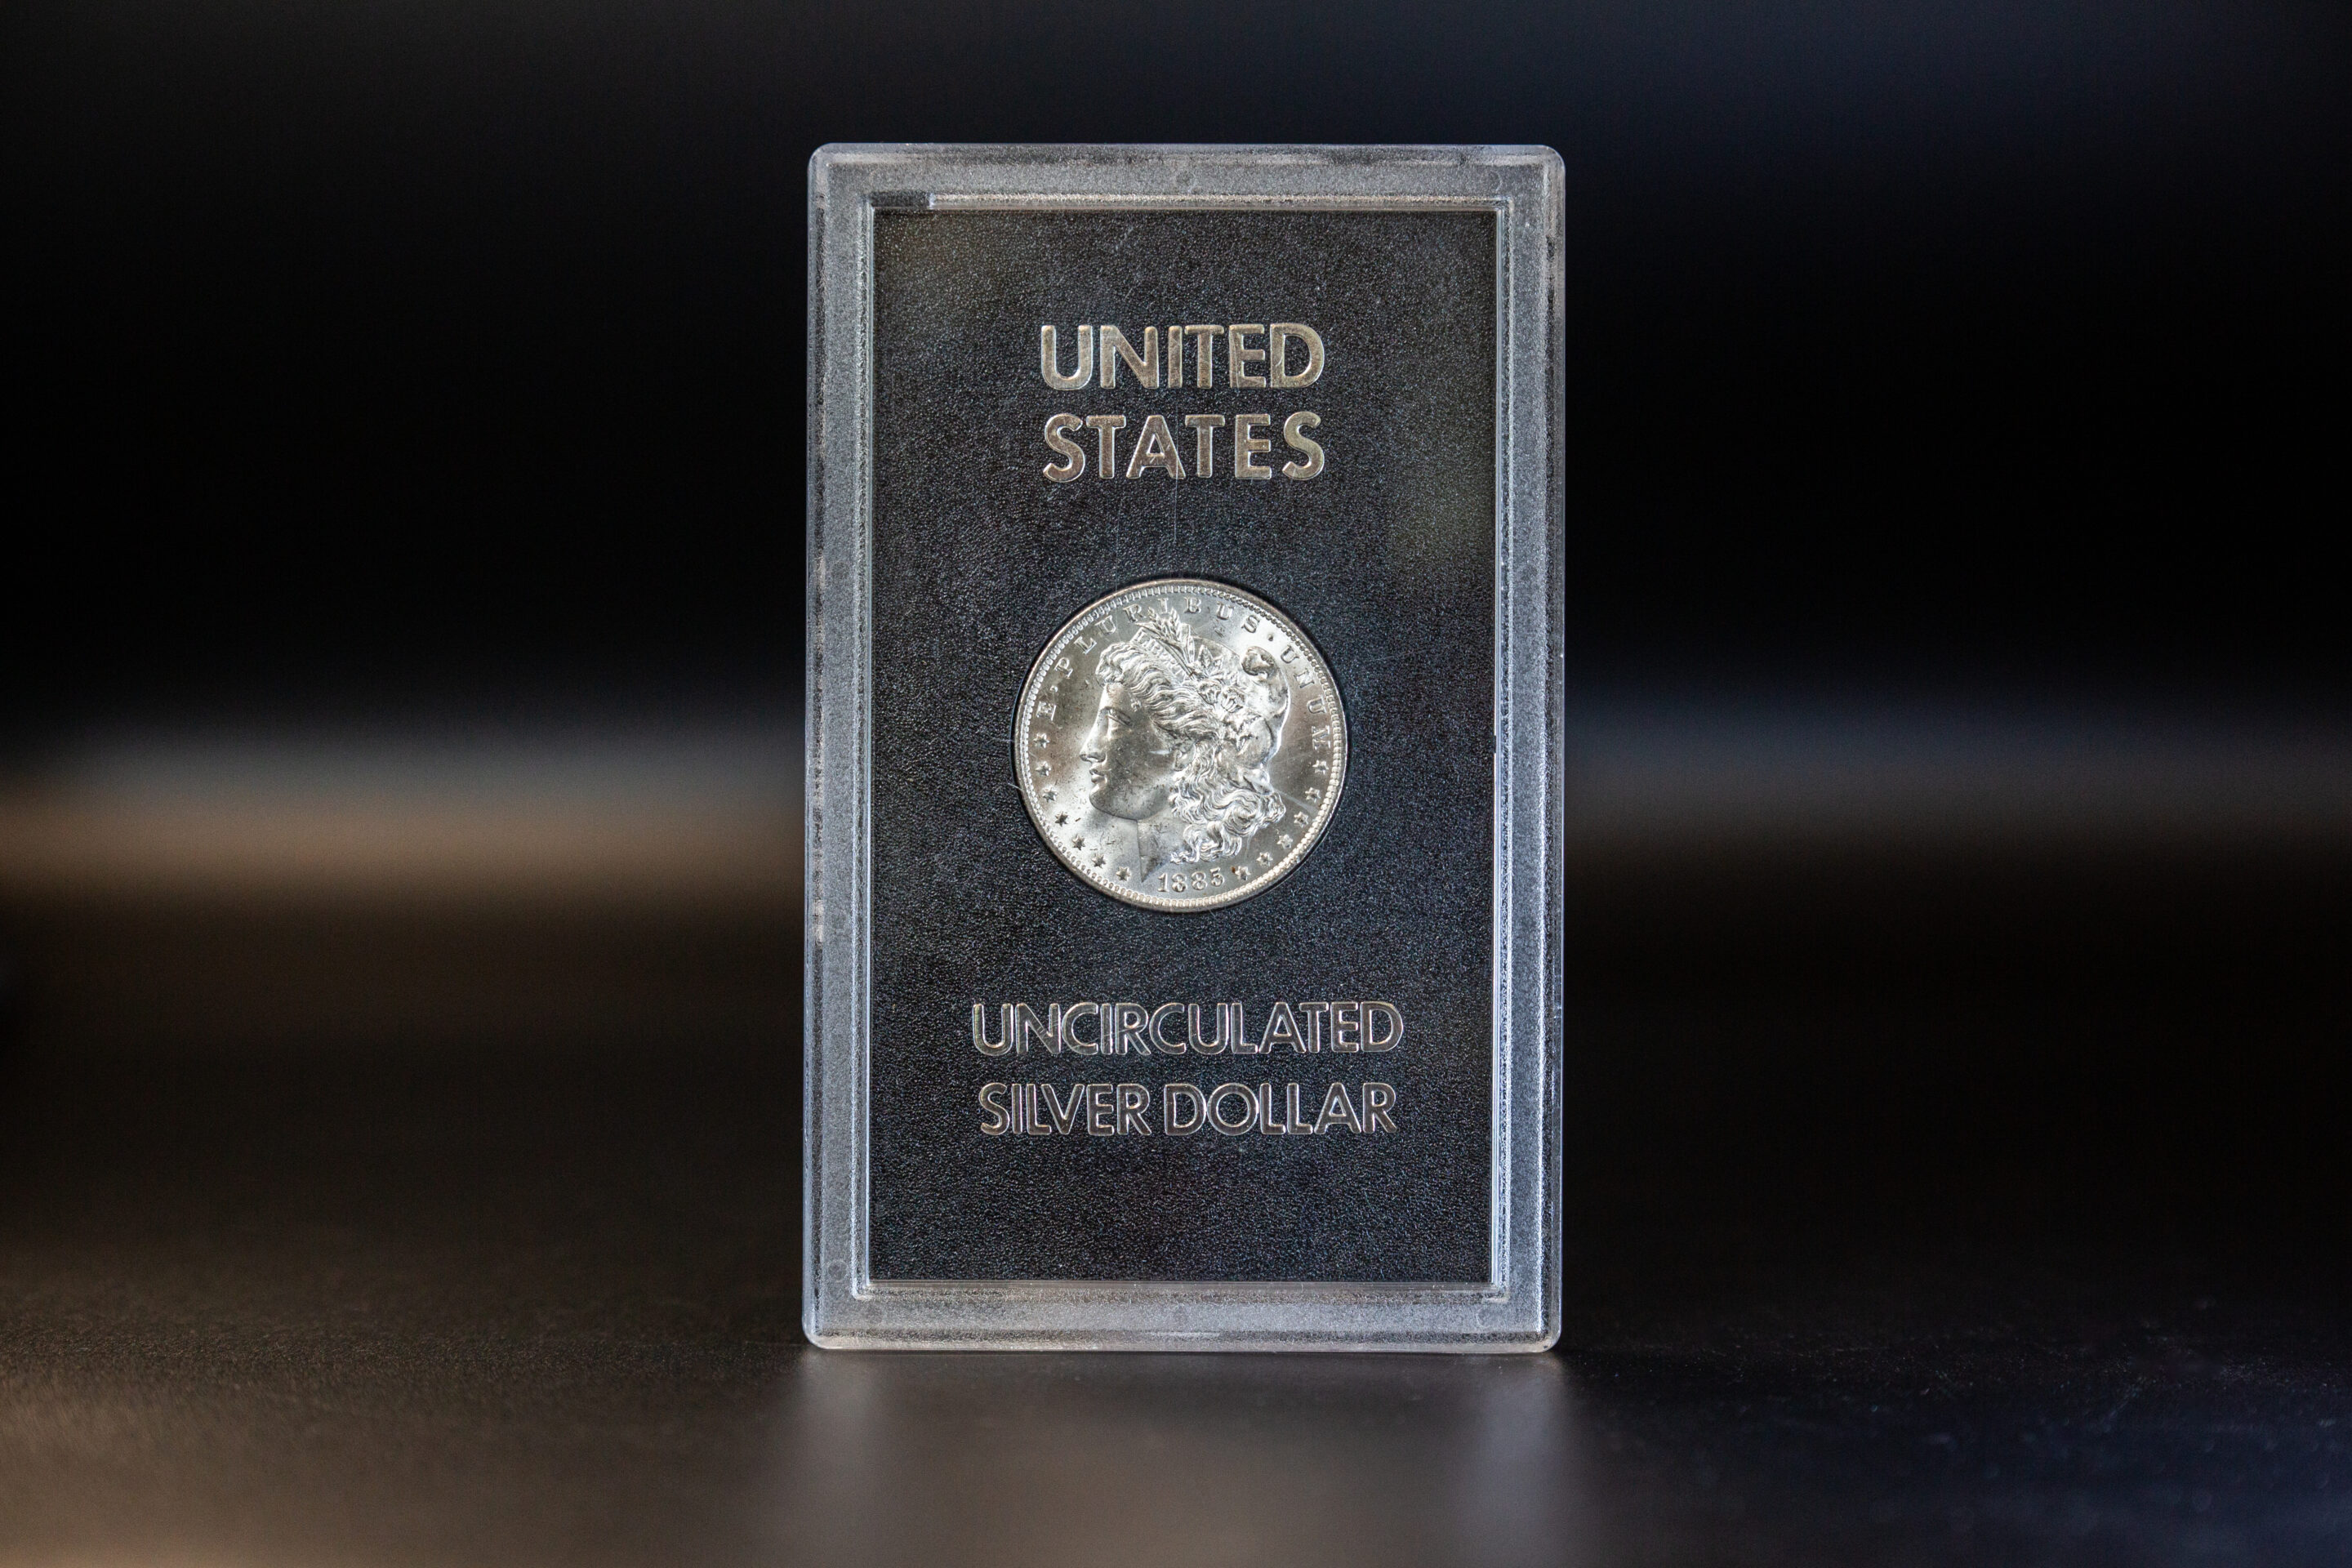 A silver dollar in a clear plastic case, now available in a 100 Gram CombiBar version.